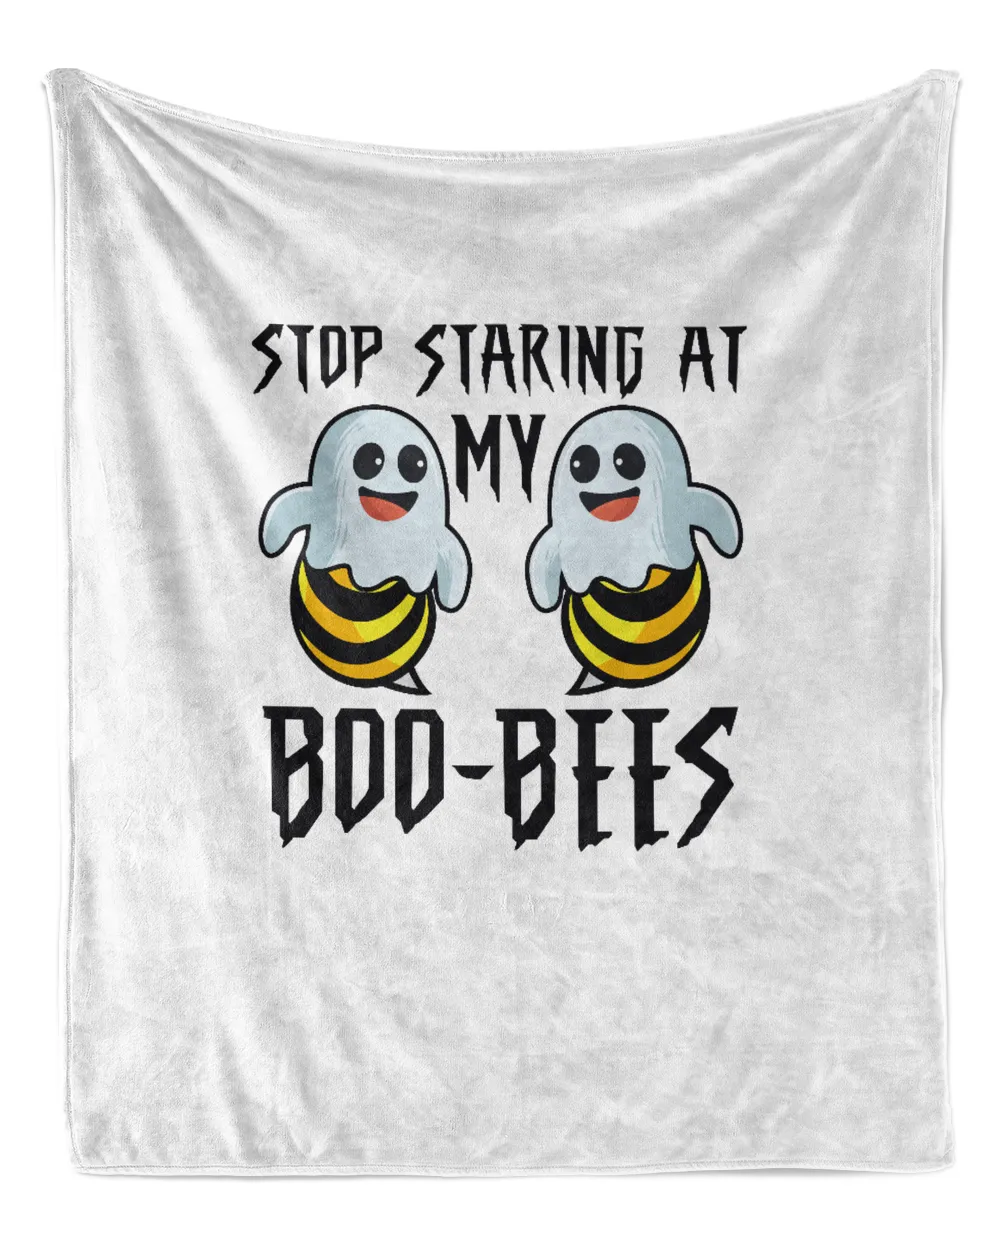 Stop Staring At My Boo Bees Funny Halloween Costume Shirt